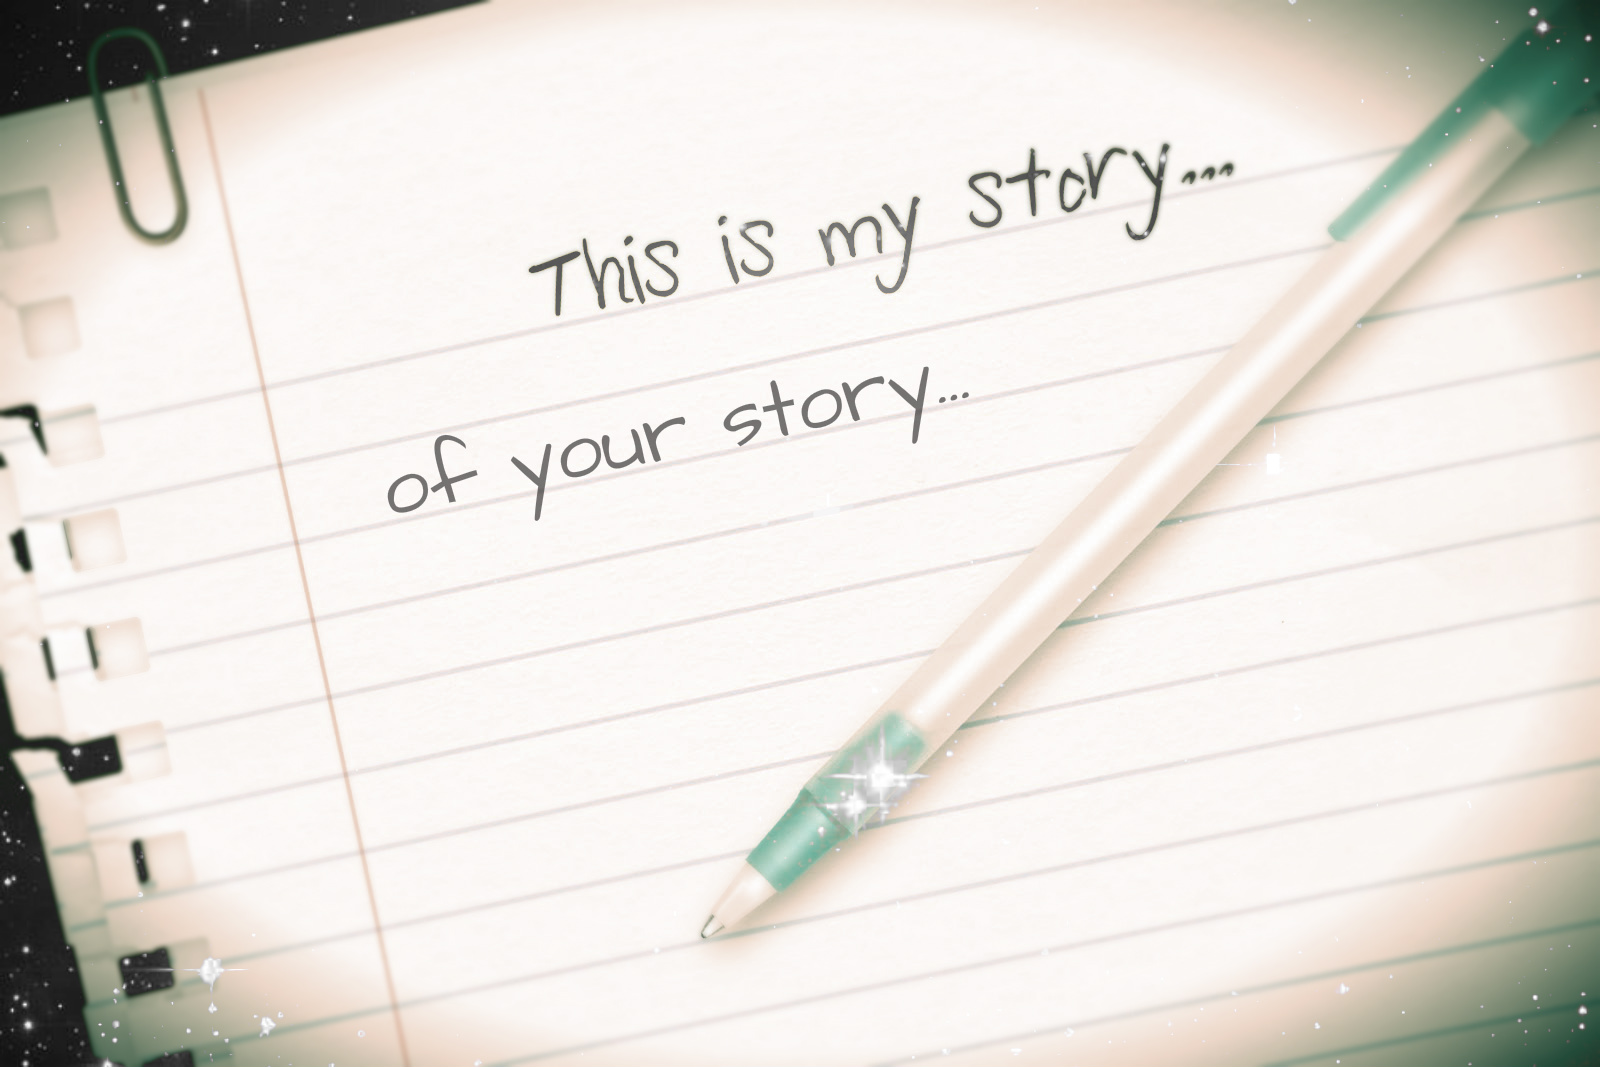 My Story Of Your Story